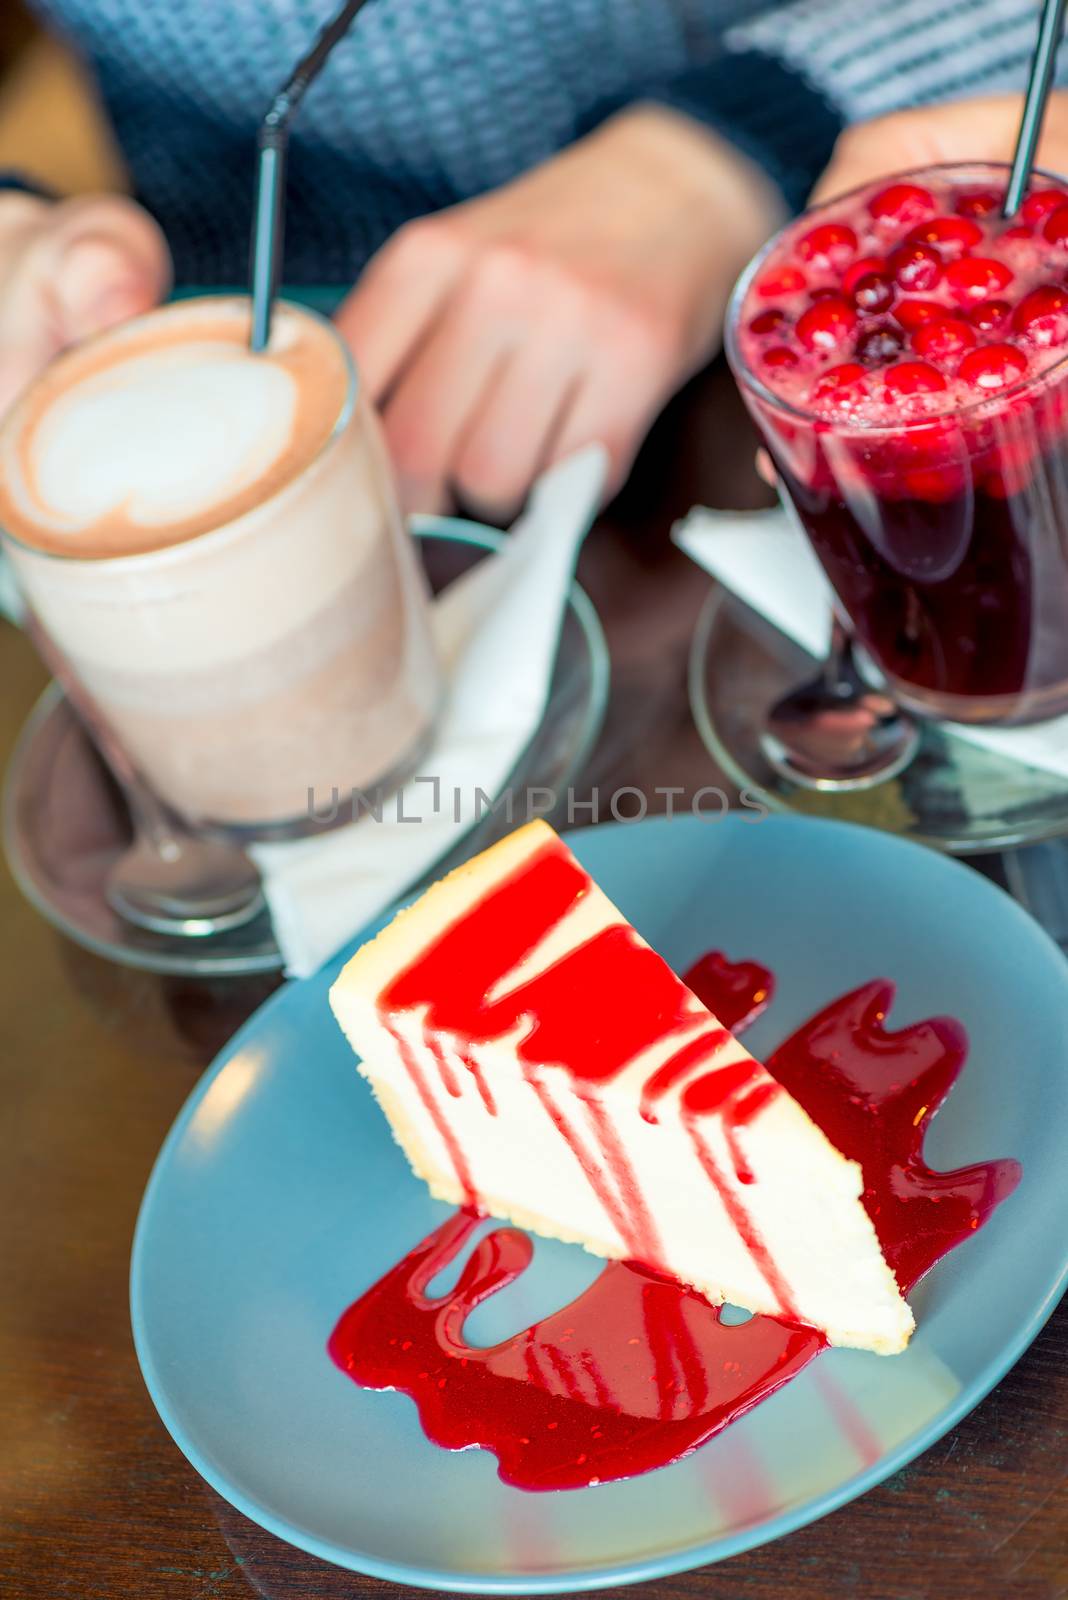 Delicious strawberry cheesecake and hot drinks in a close-up cafe